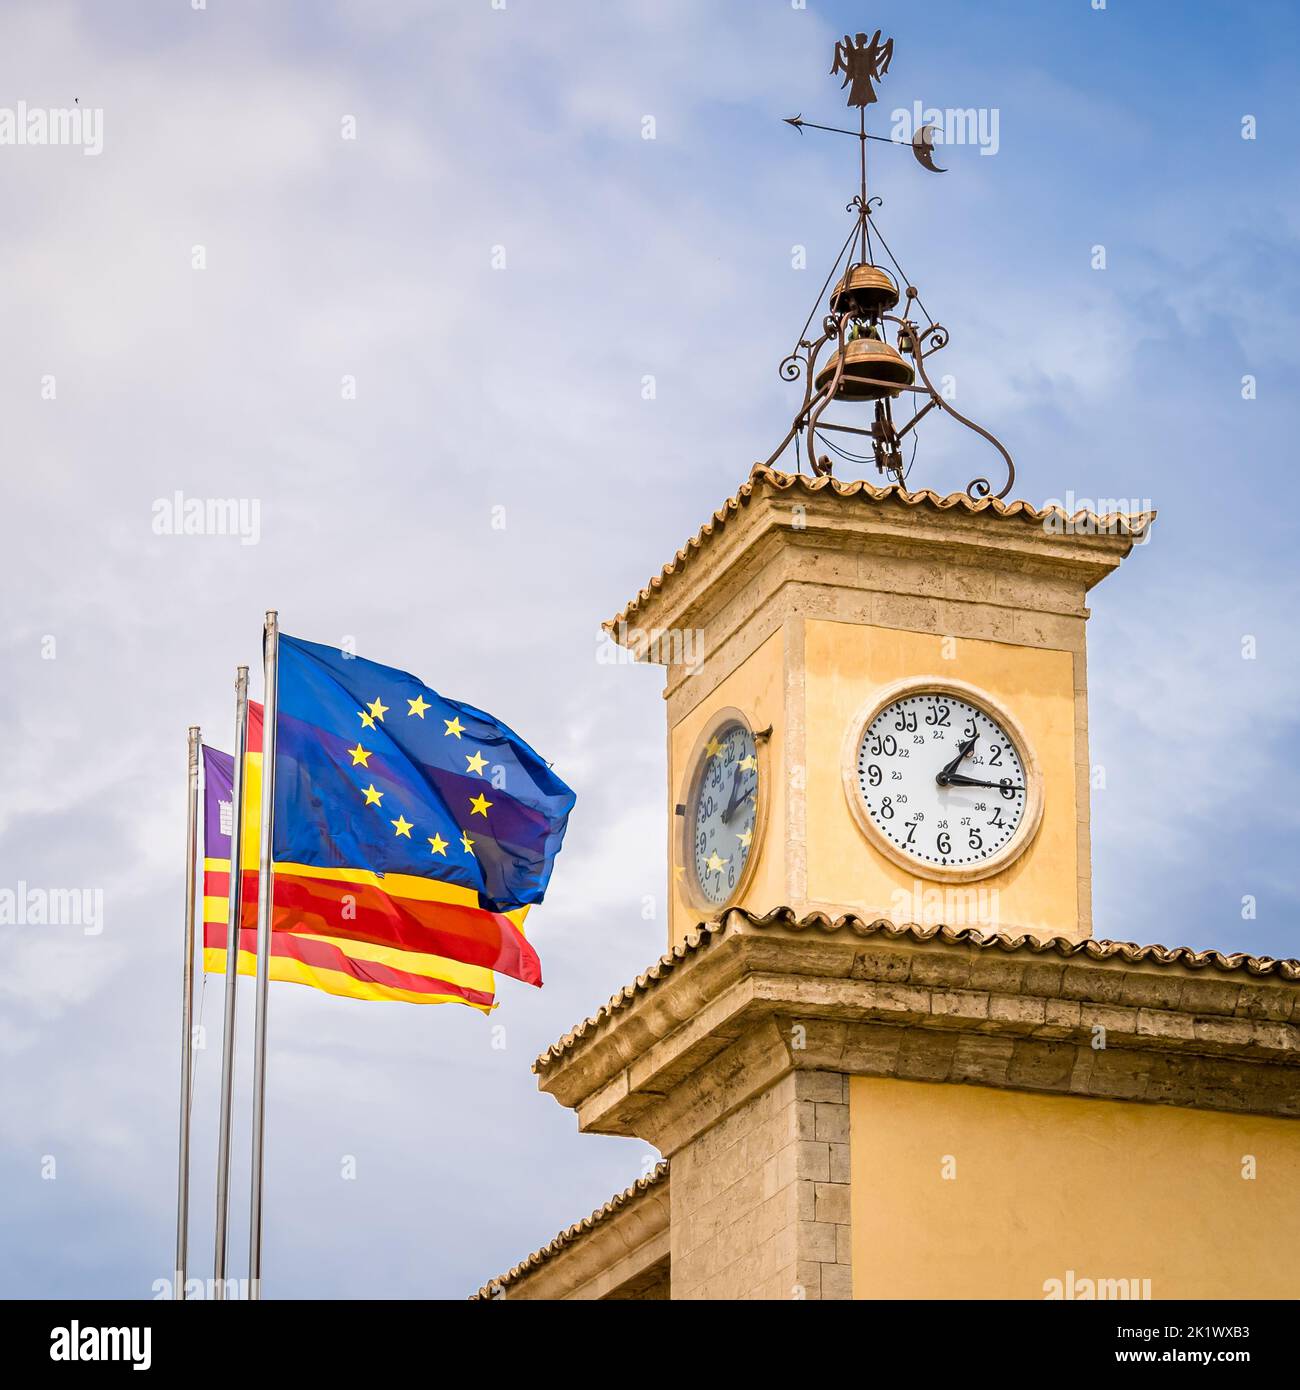 Flags of the European Union, Spain and the Balearic Islands waving in the wind in front of the mediterranean clocktower of the seat of the government. Stock Photo